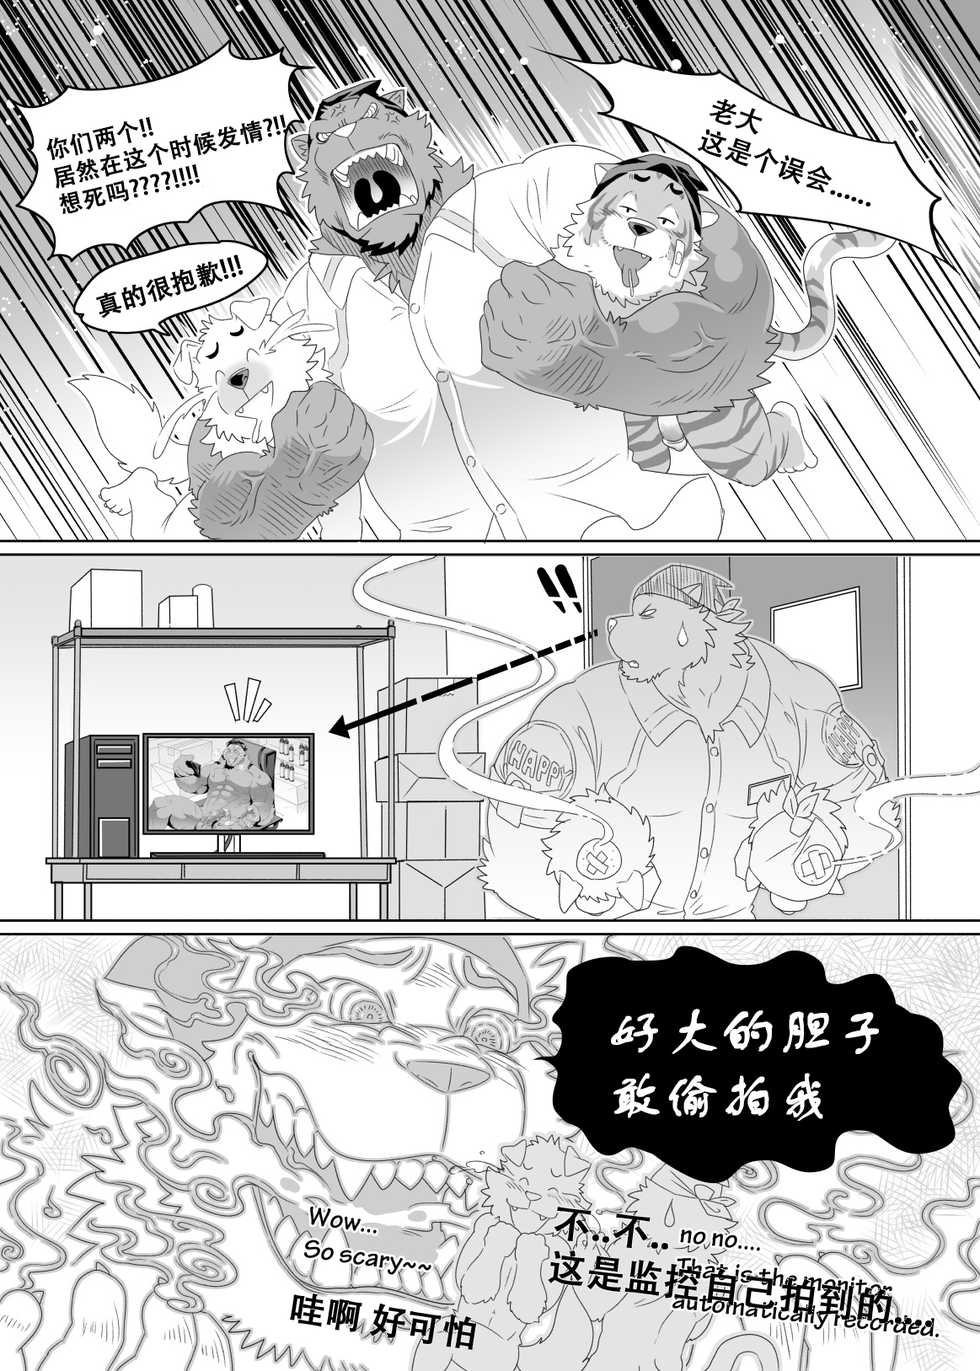 [KUMAHACHI] - "开心"便利店 ["Happy" Convenience Store] [Chinese] - Page 16